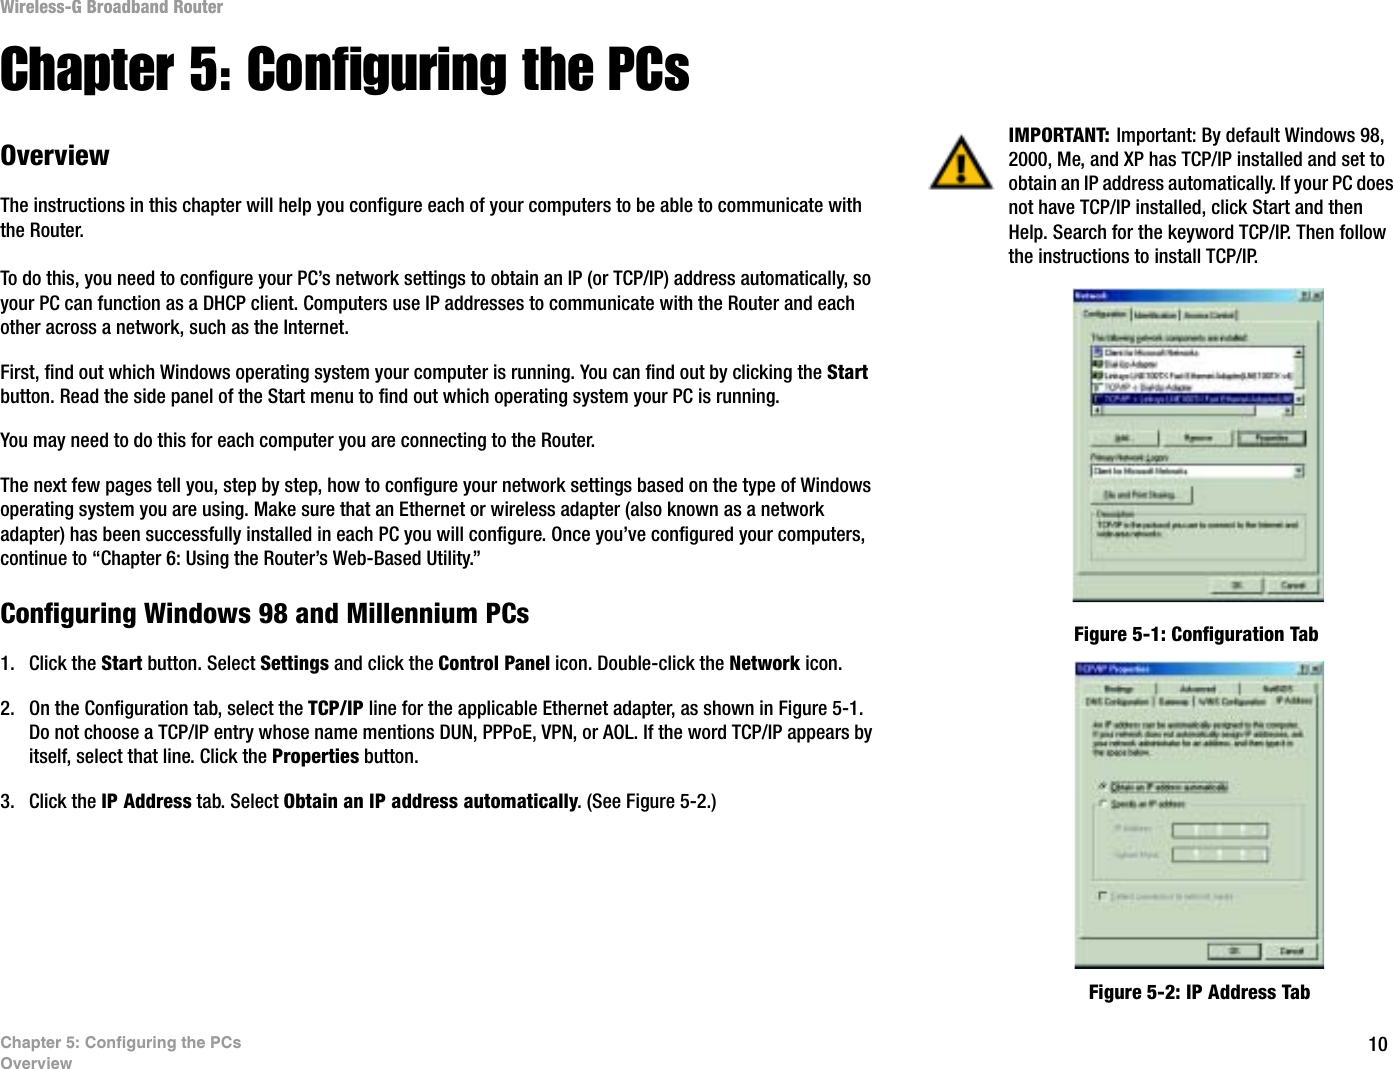 10Chapter 5: Configuring the PCsOverviewWireless-G Broadband RouterChapter 5: Configuring the PCsOverviewThe instructions in this chapter will help you configure each of your computers to be able to communicate with the Router.To do this, you need to configure your PC’s network settings to obtain an IP (or TCP/IP) address automatically, so your PC can function as a DHCP client. Computers use IP addresses to communicate with the Router and each other across a network, such as the Internet. First, find out which Windows operating system your computer is running. You can find out by clicking the Start button. Read the side panel of the Start menu to find out which operating system your PC is running.You may need to do this for each computer you are connecting to the Router.The next few pages tell you, step by step, how to configure your network settings based on the type of Windows operating system you are using. Make sure that an Ethernet or wireless adapter (also known as a network adapter) has been successfully installed in each PC you will configure. Once you’ve configured your computers, continue to “Chapter 6: Using the Router’s Web-Based Utility.”Configuring Windows 98 and Millennium PCs1. Click the Start button. Select Settings and click the Control Panel icon. Double-click the Network icon.2. On the Configuration tab, select the TCP/IP line for the applicable Ethernet adapter, as shown in Figure 5-1. Do not choose a TCP/IP entry whose name mentions DUN, PPPoE, VPN, or AOL. If the word TCP/IP appears by itself, select that line. Click the Properties button.3. Click the IP Address tab. Select Obtain an IP address automatically. (See Figure 5-2.)IMPORTANT: Important: By default Windows 98, 2000, Me, and XP has TCP/IP installed and set to obtain an IP address automatically. If your PC does not have TCP/IP installed, click Start and then Help. Search for the keyword TCP/IP. Then follow the instructions to install TCP/IP.Figure 5-1: Configuration TabFigure 5-2: IP Address Tab